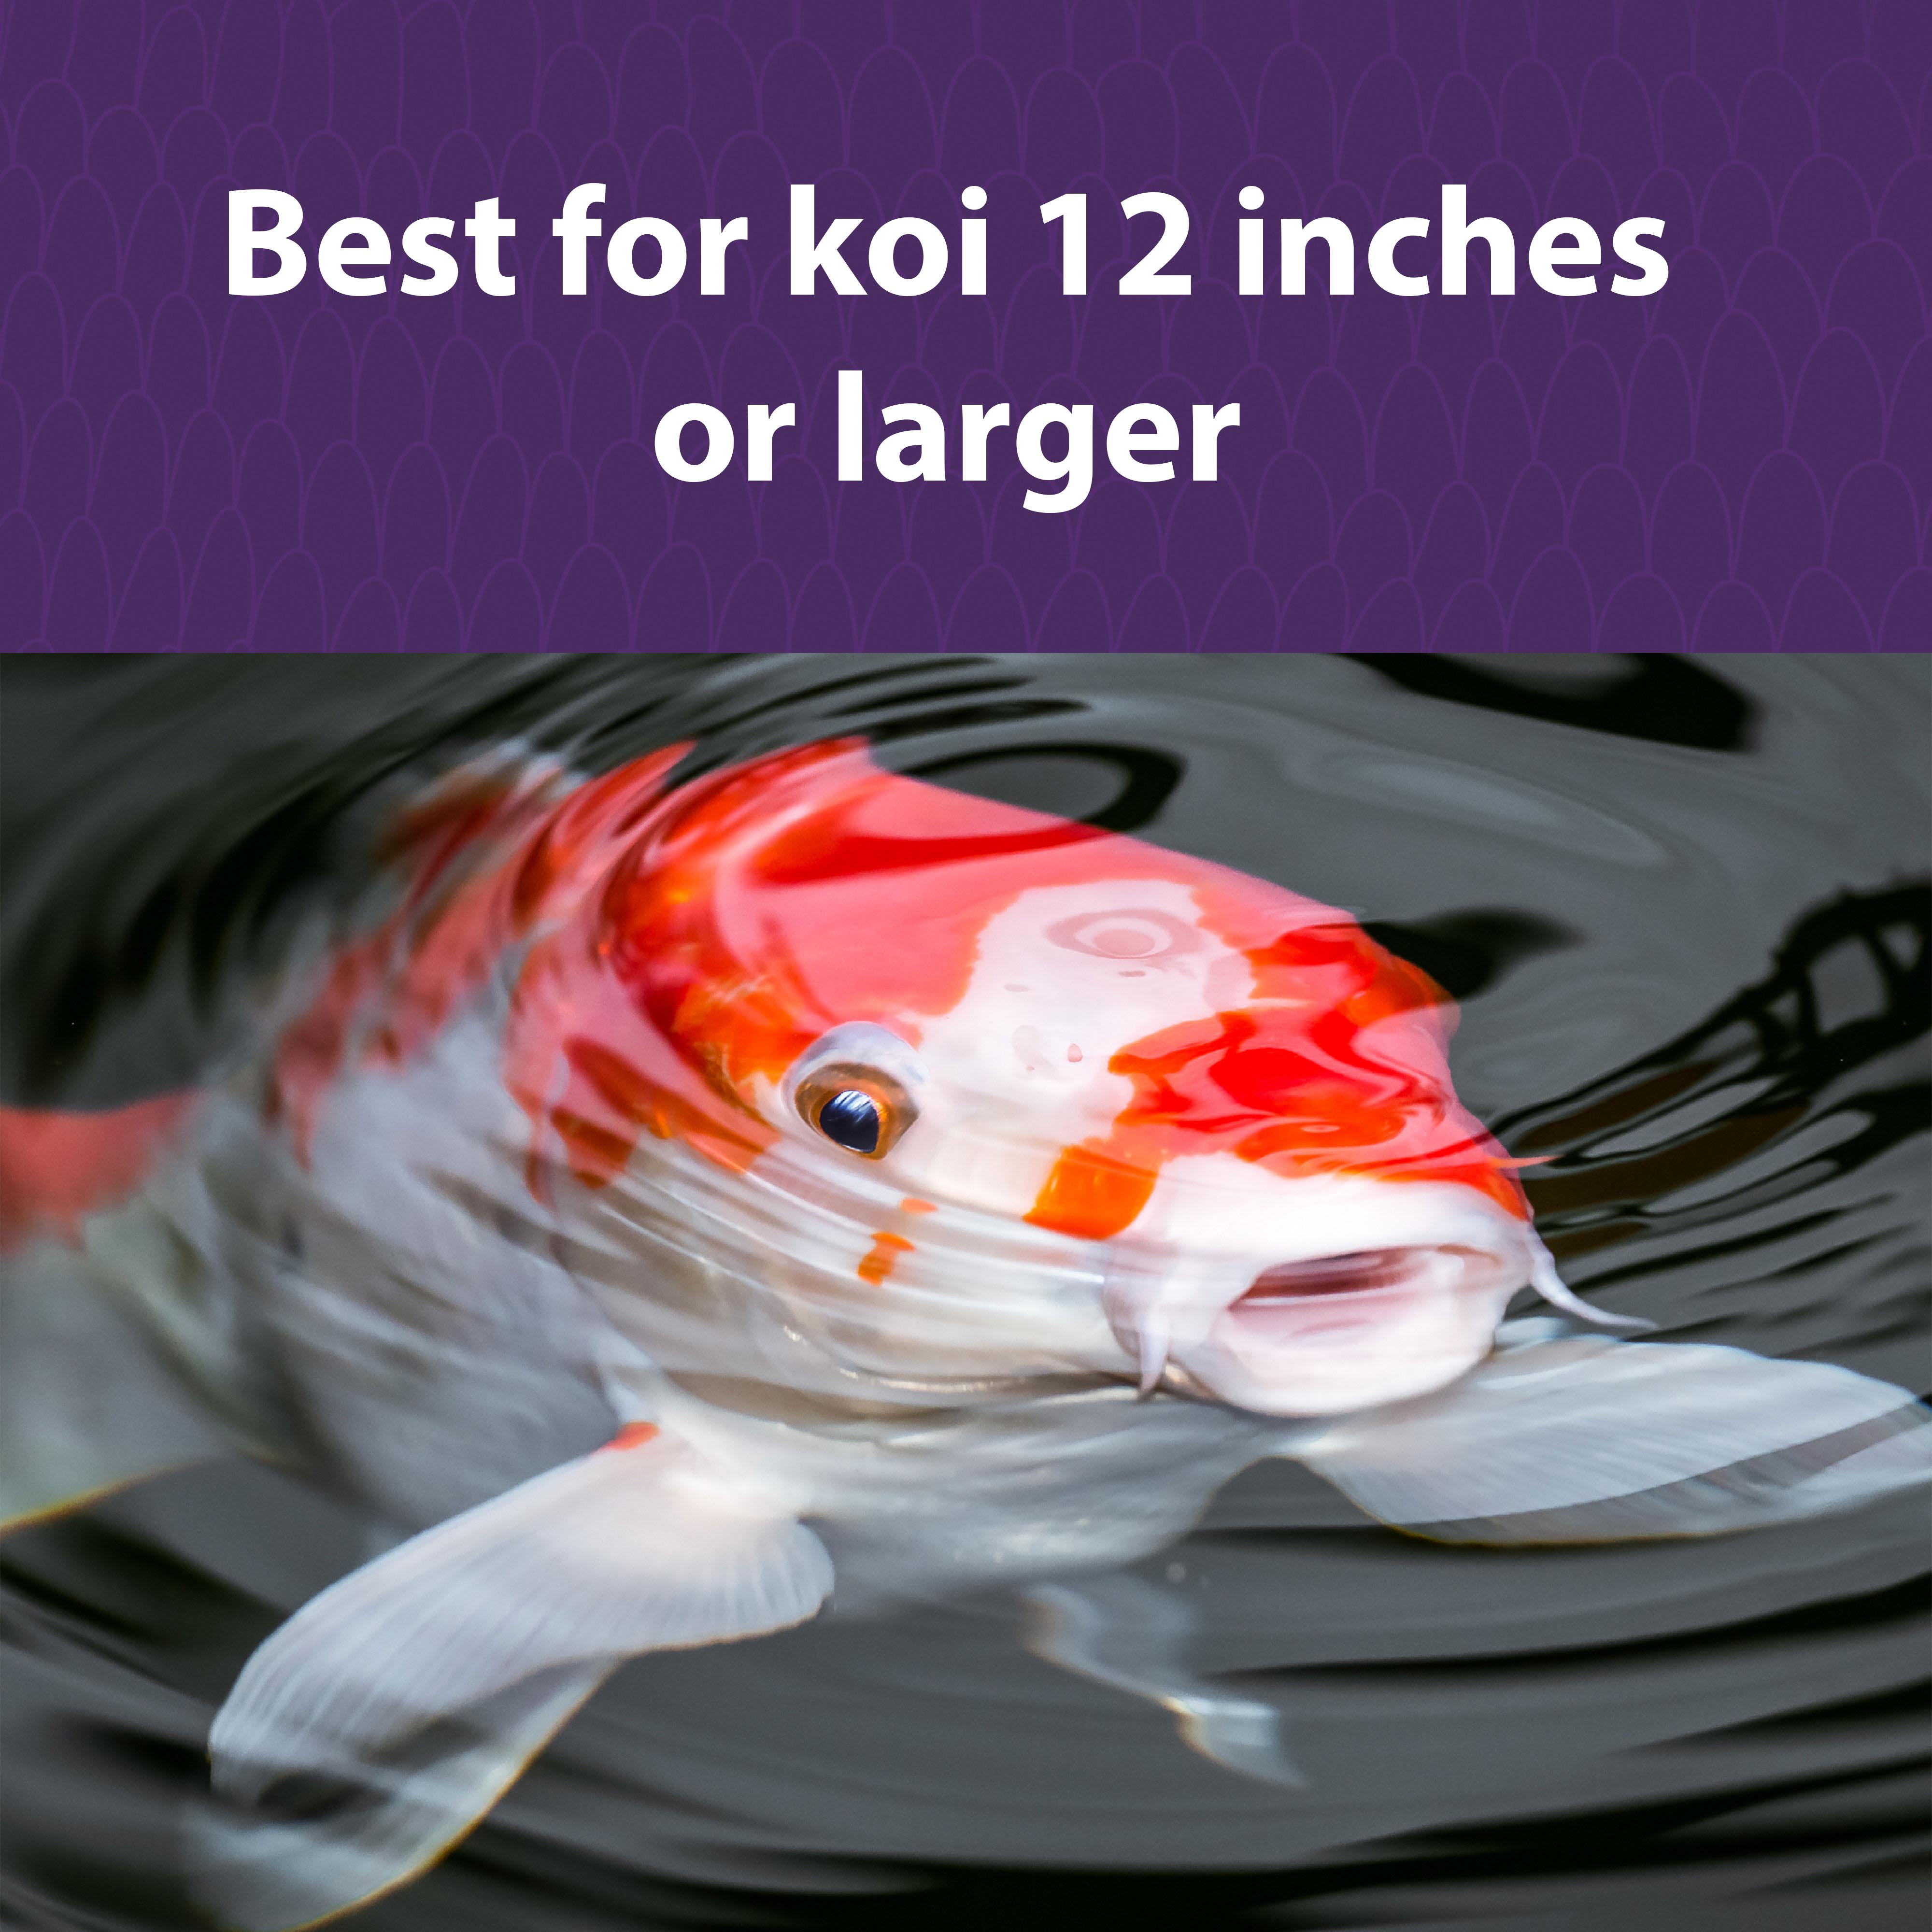 Best for Koi 12 inches or larger